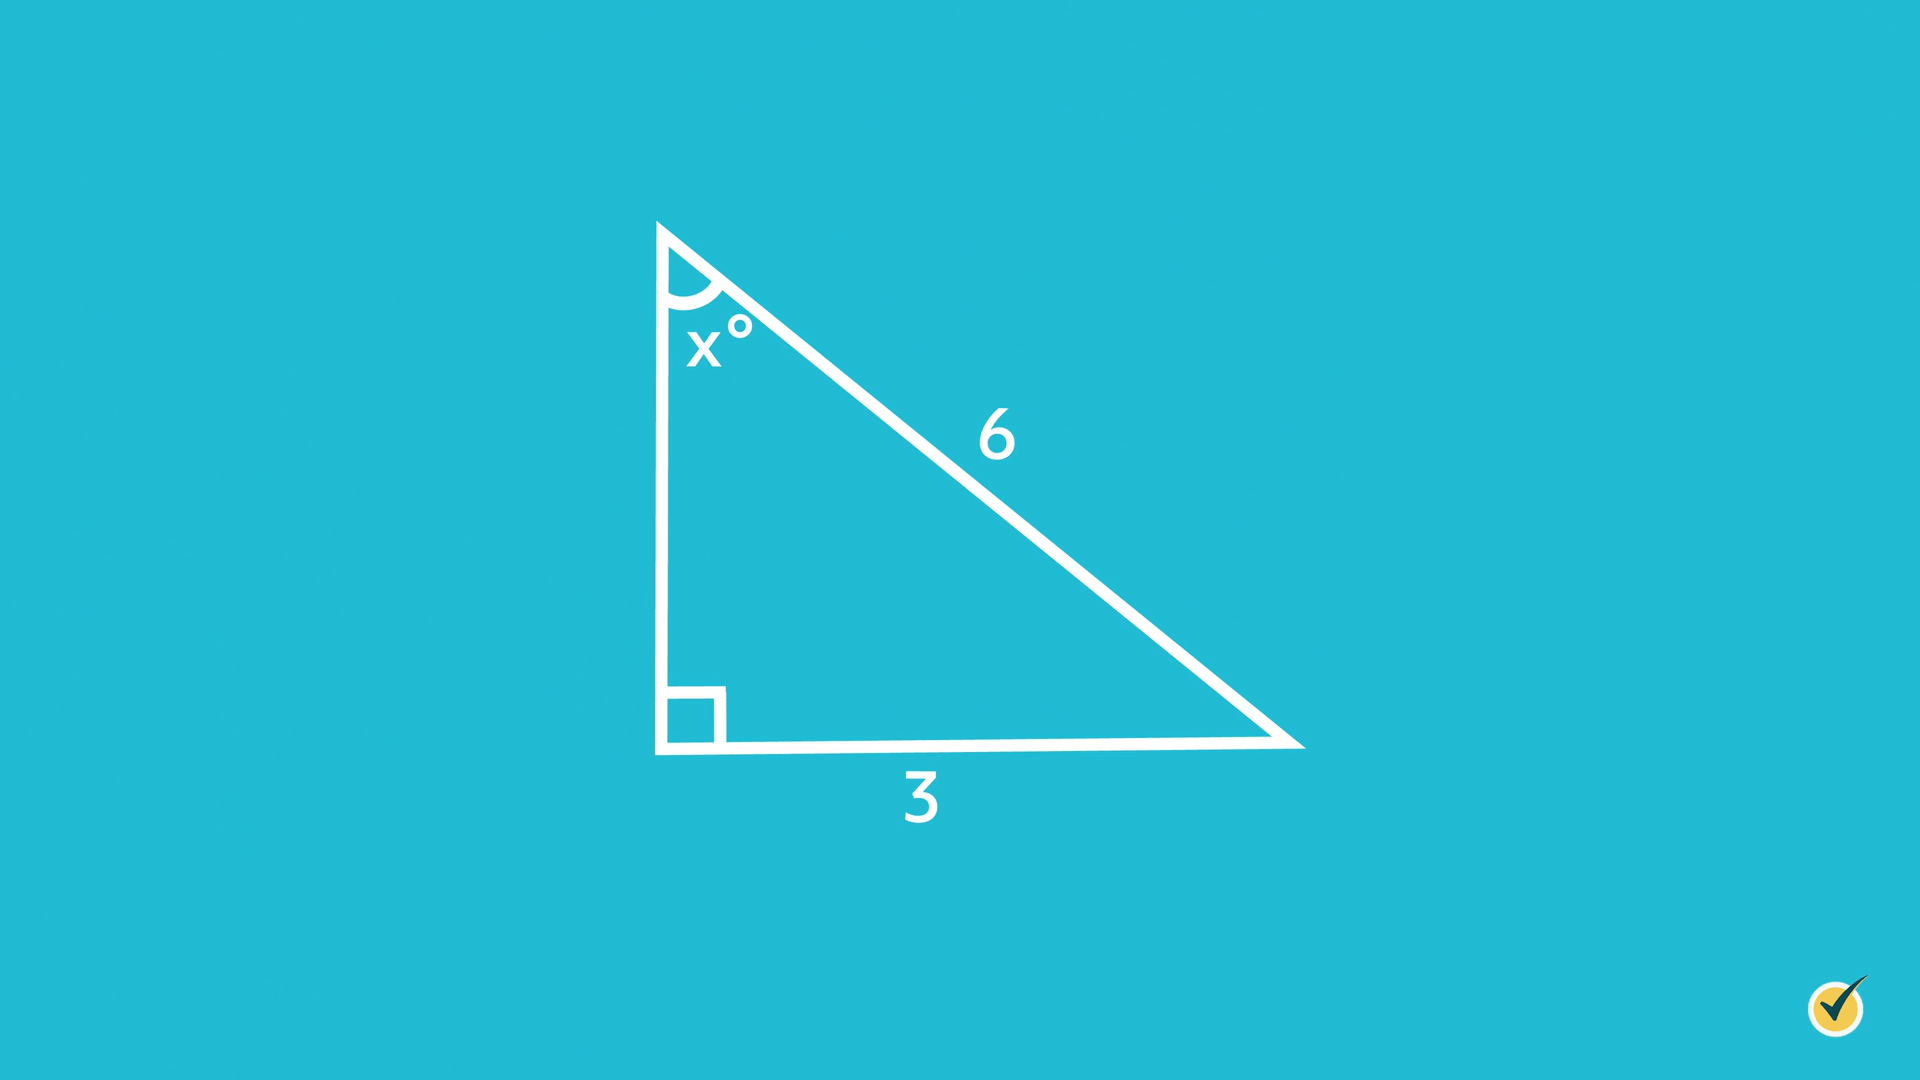 right triangle, right side hypotenuse 6, bottom side 3, top left angle marked x degrees, bottom left angle marked with a square